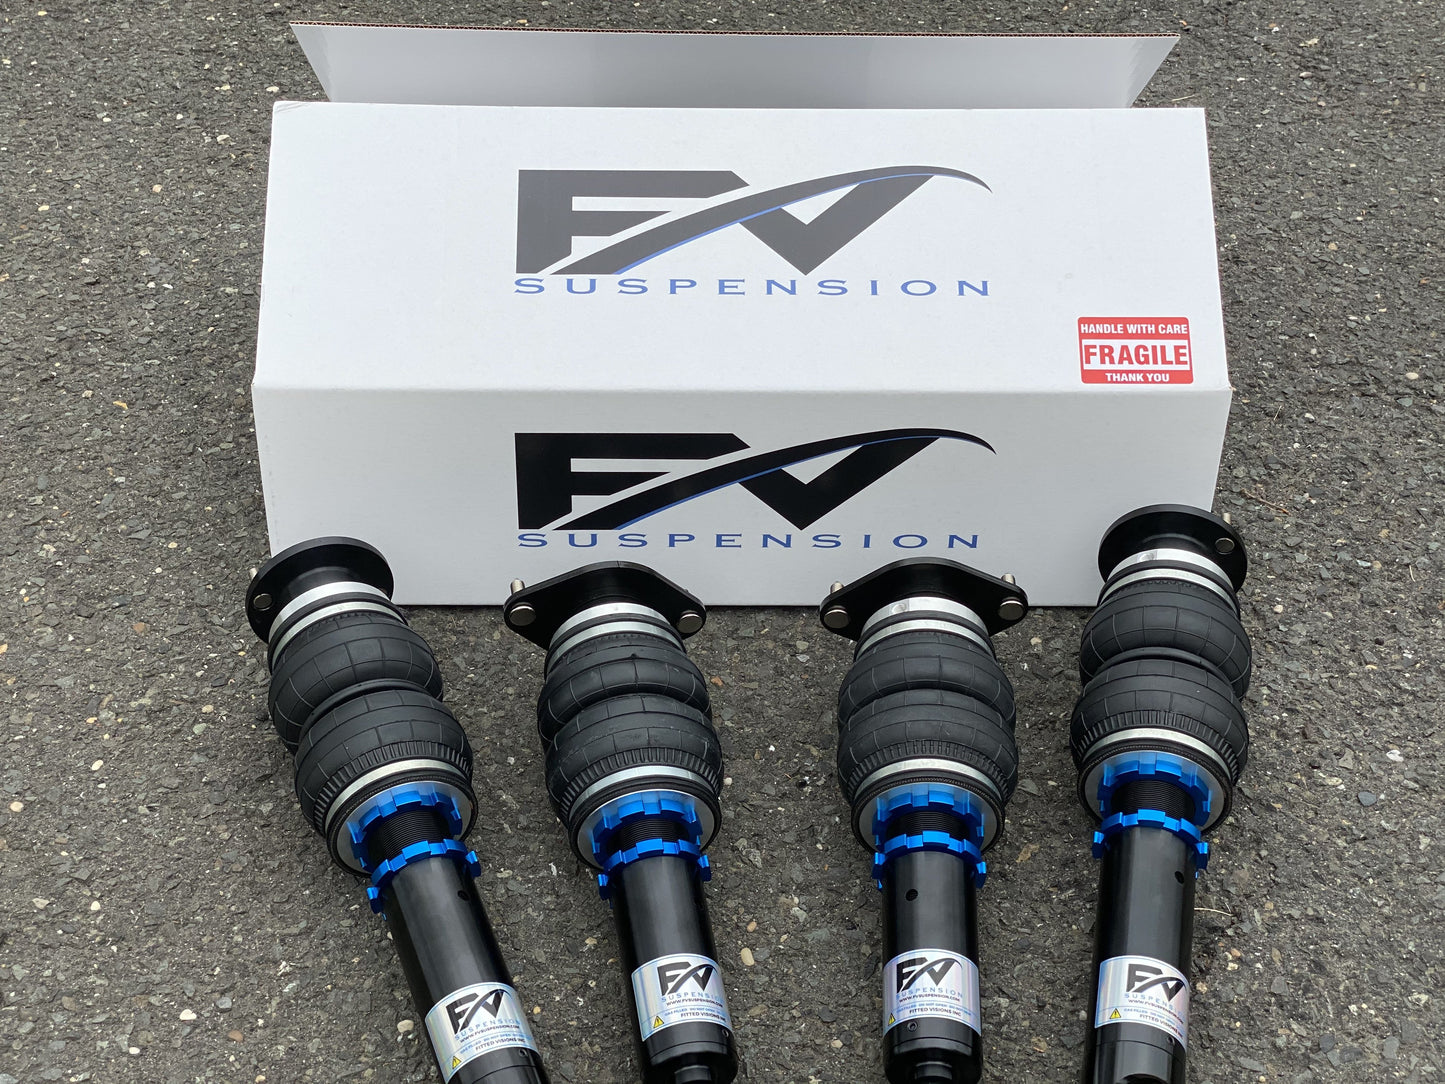 FV Suspension Budget Air Ride Package - Any make and model